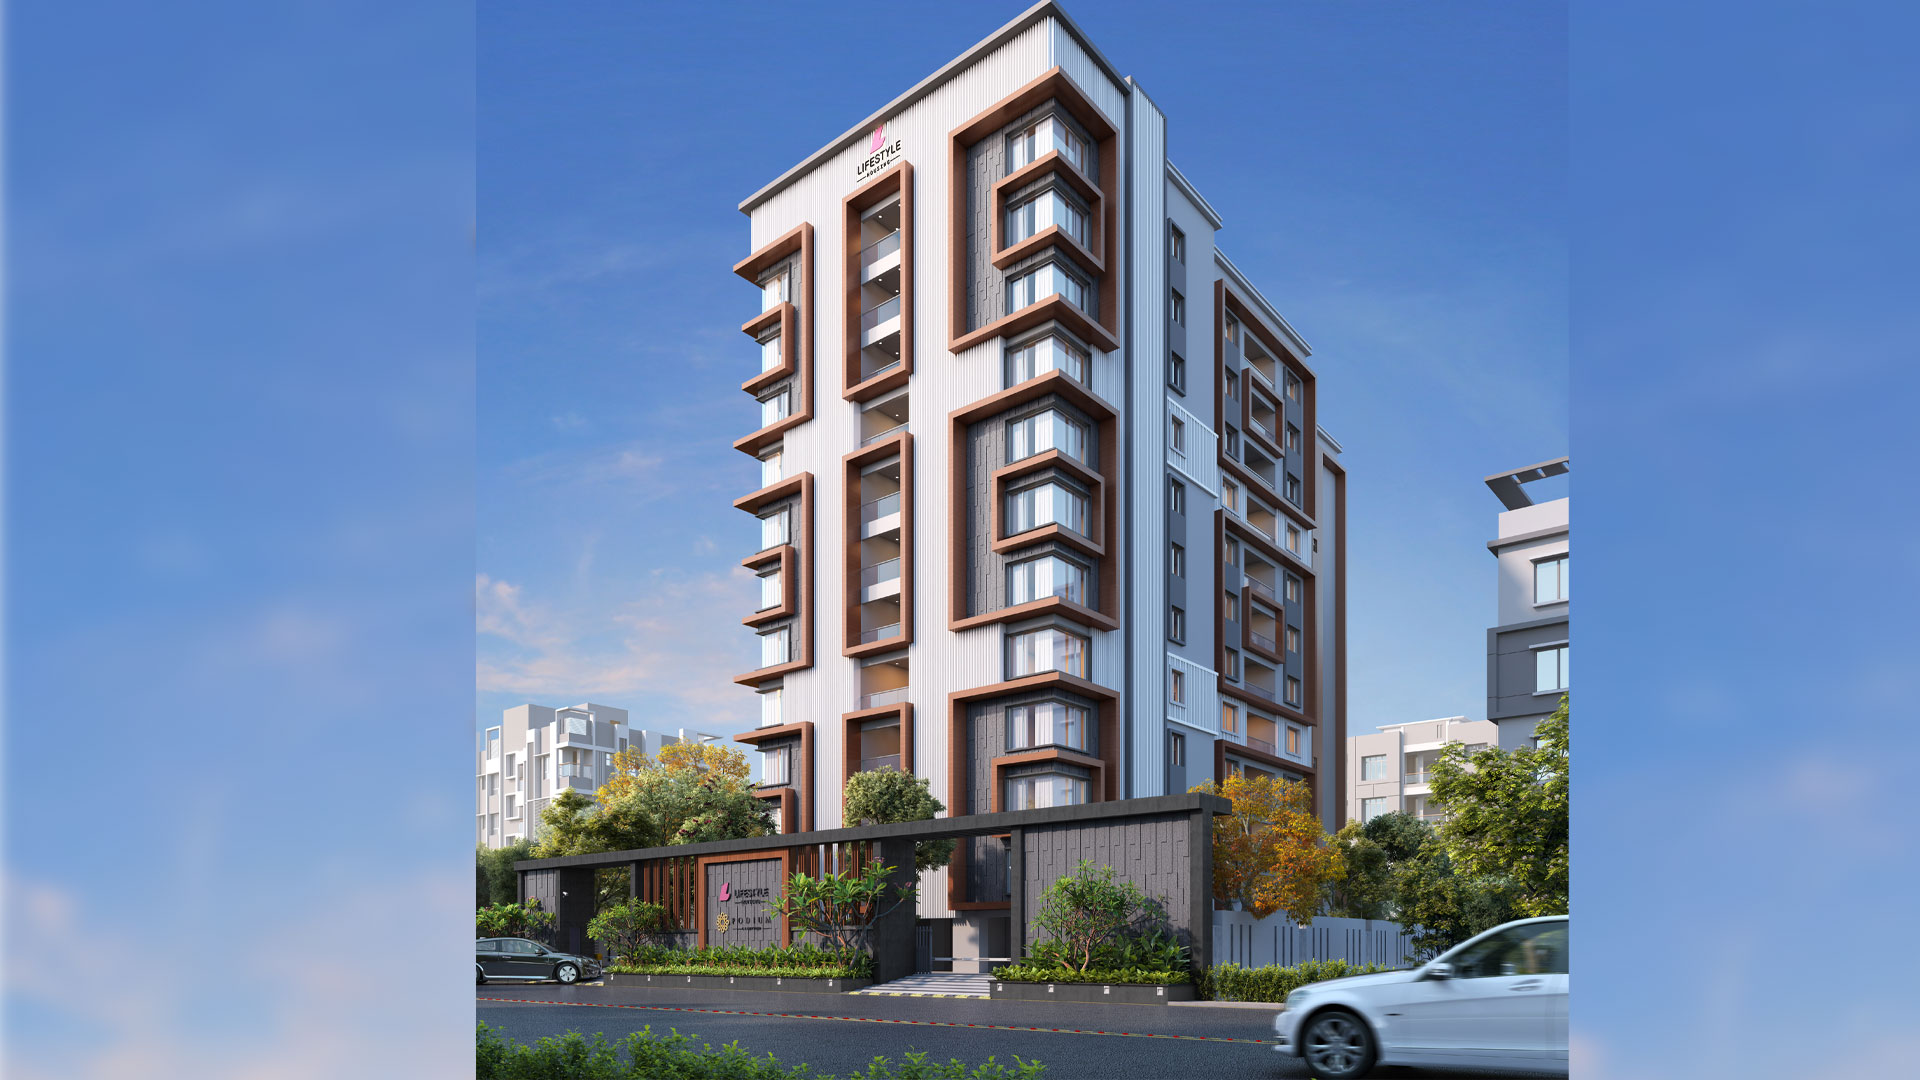 2/3 BHK Flats for Sale in Singaperumal Koil